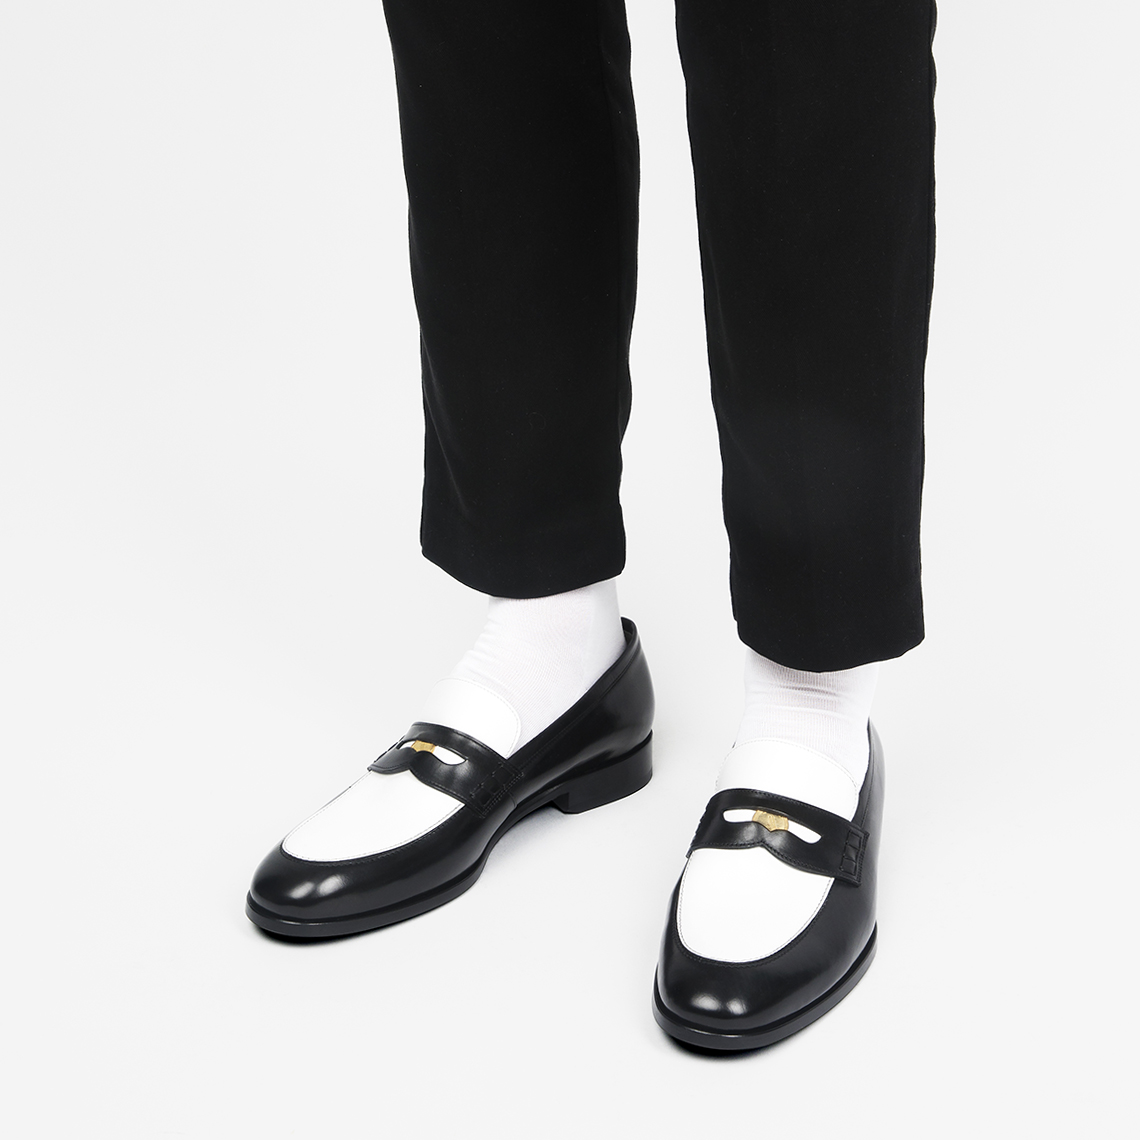 Wade Penny Loafers polished black and white calfskin leather Archels